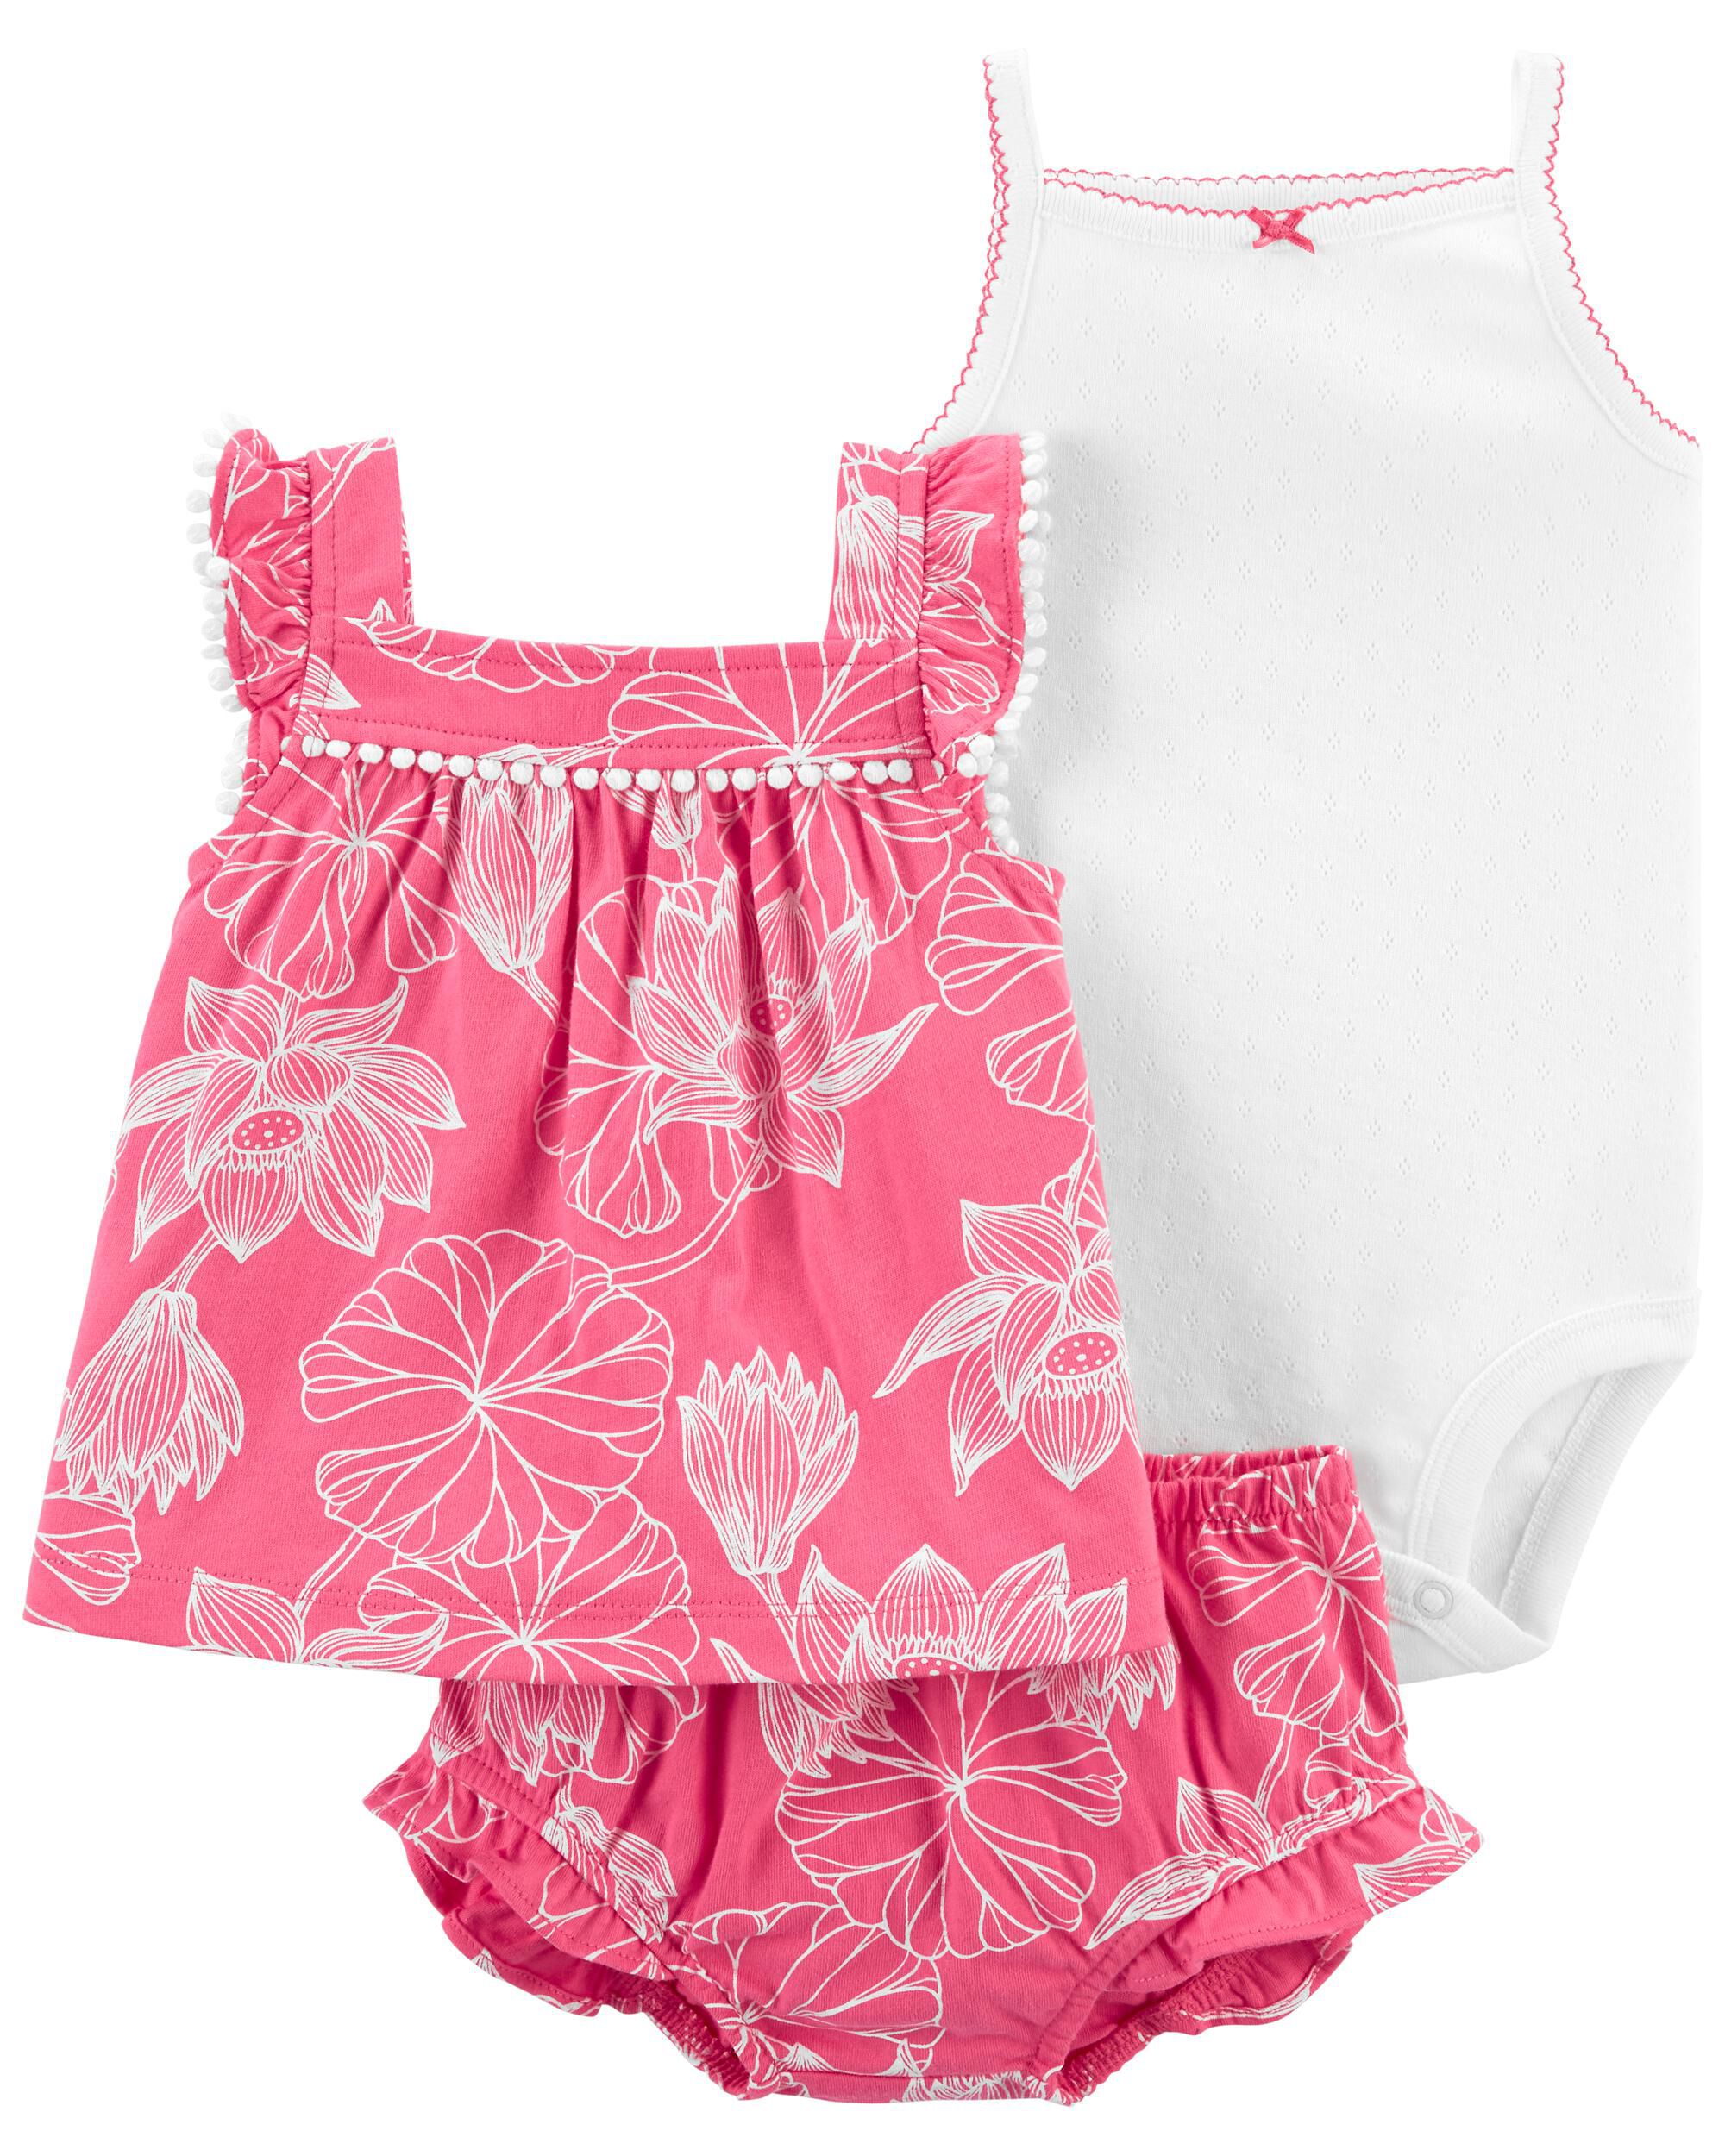 CARTER'S BABY GIRL'S 2 PIECE SHORT SET BRIGHT PINK GRAY  & WHITE  NWT 